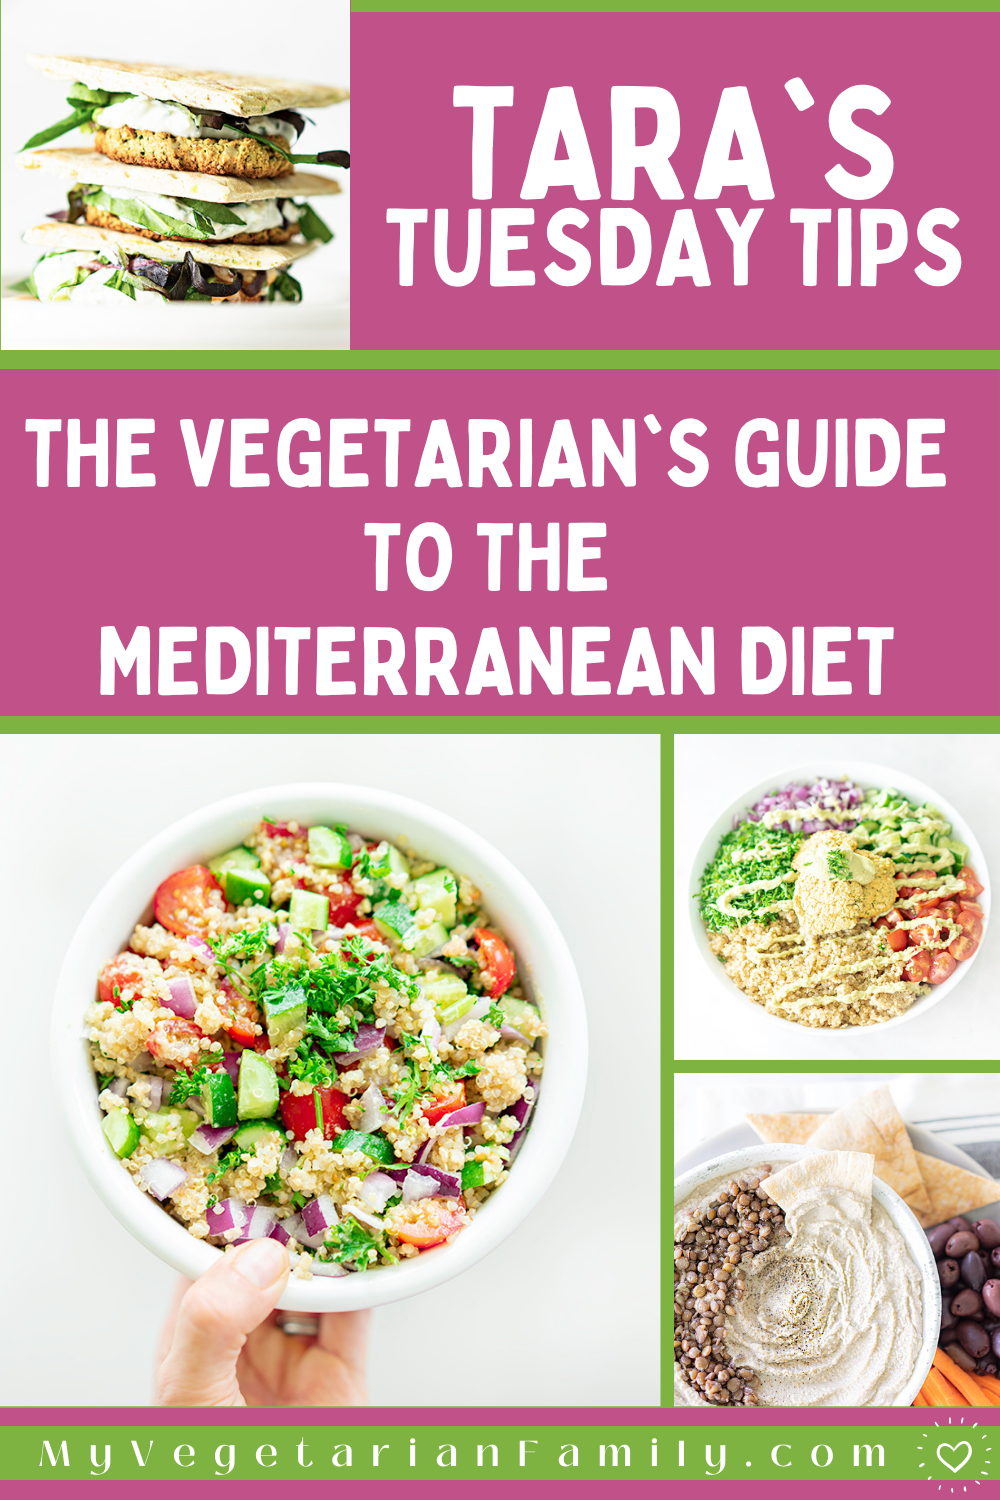 The Vegetarian's Guide To The Mediterranean Diet | Tara's Tuesday Tips My Vegetarian Family #tarastuesdaytips #vegetarianmediterraneandiet #nutritiontips